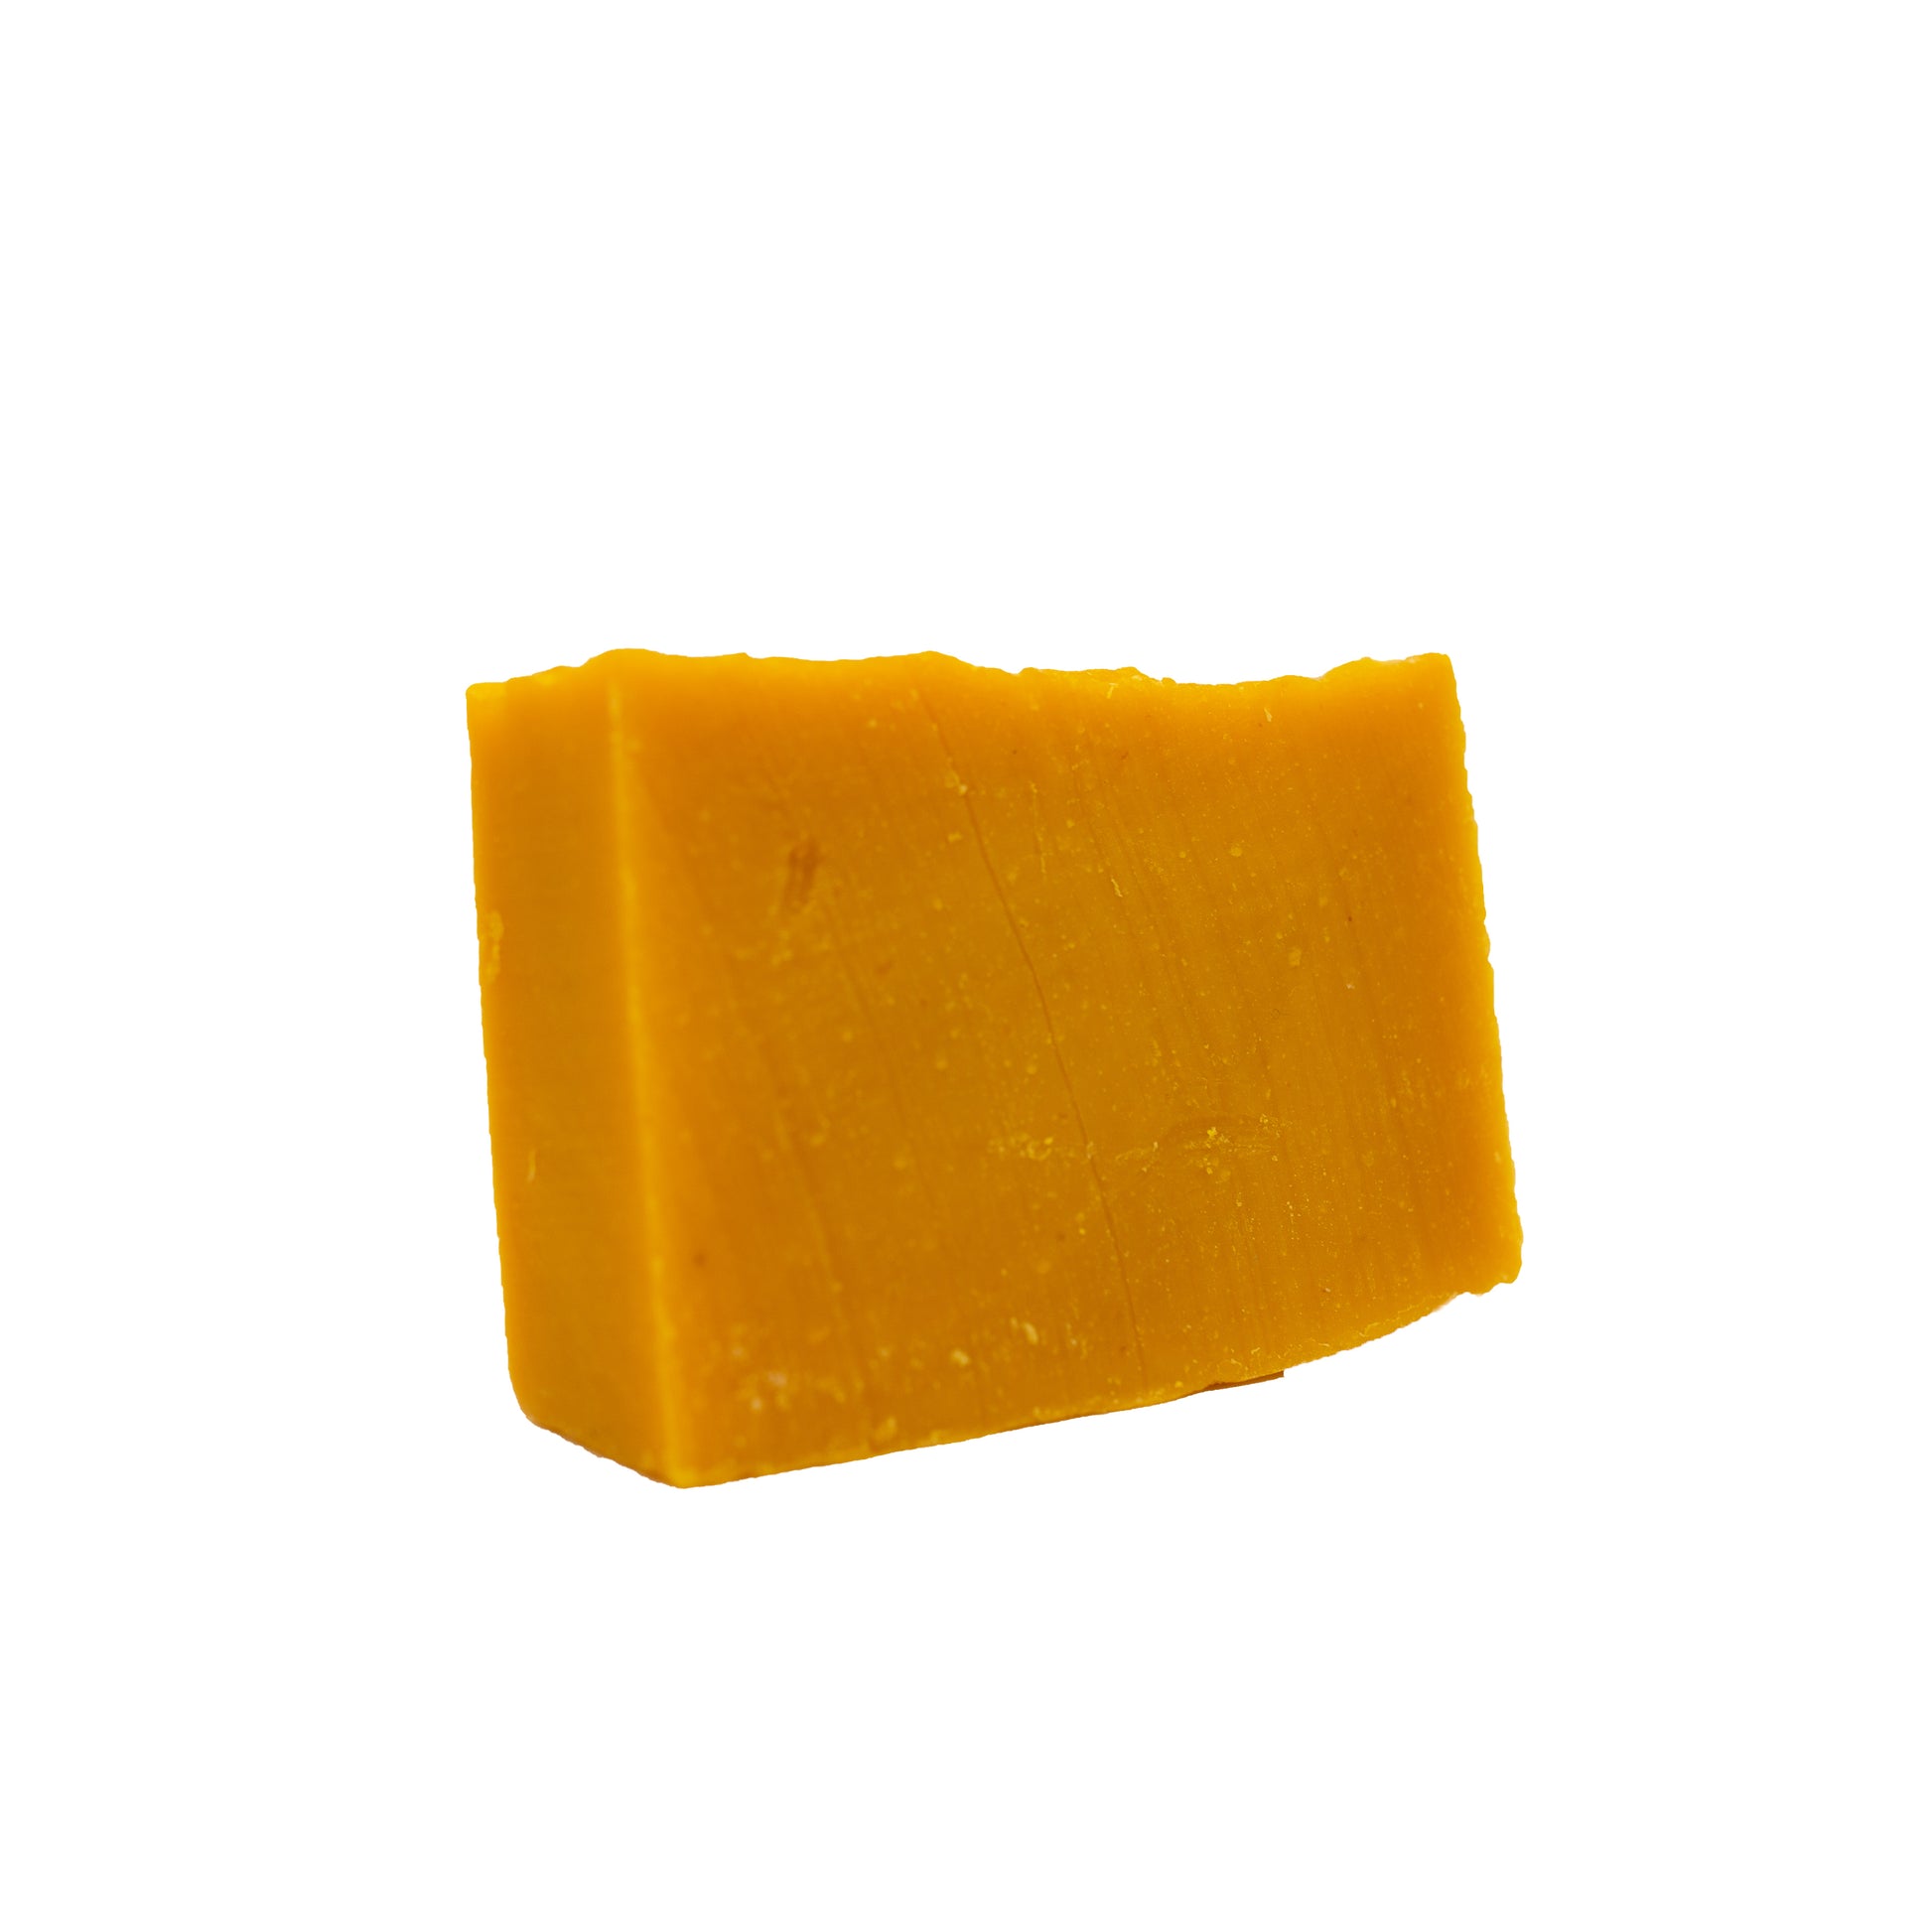 Orange soap bar with a white background. 